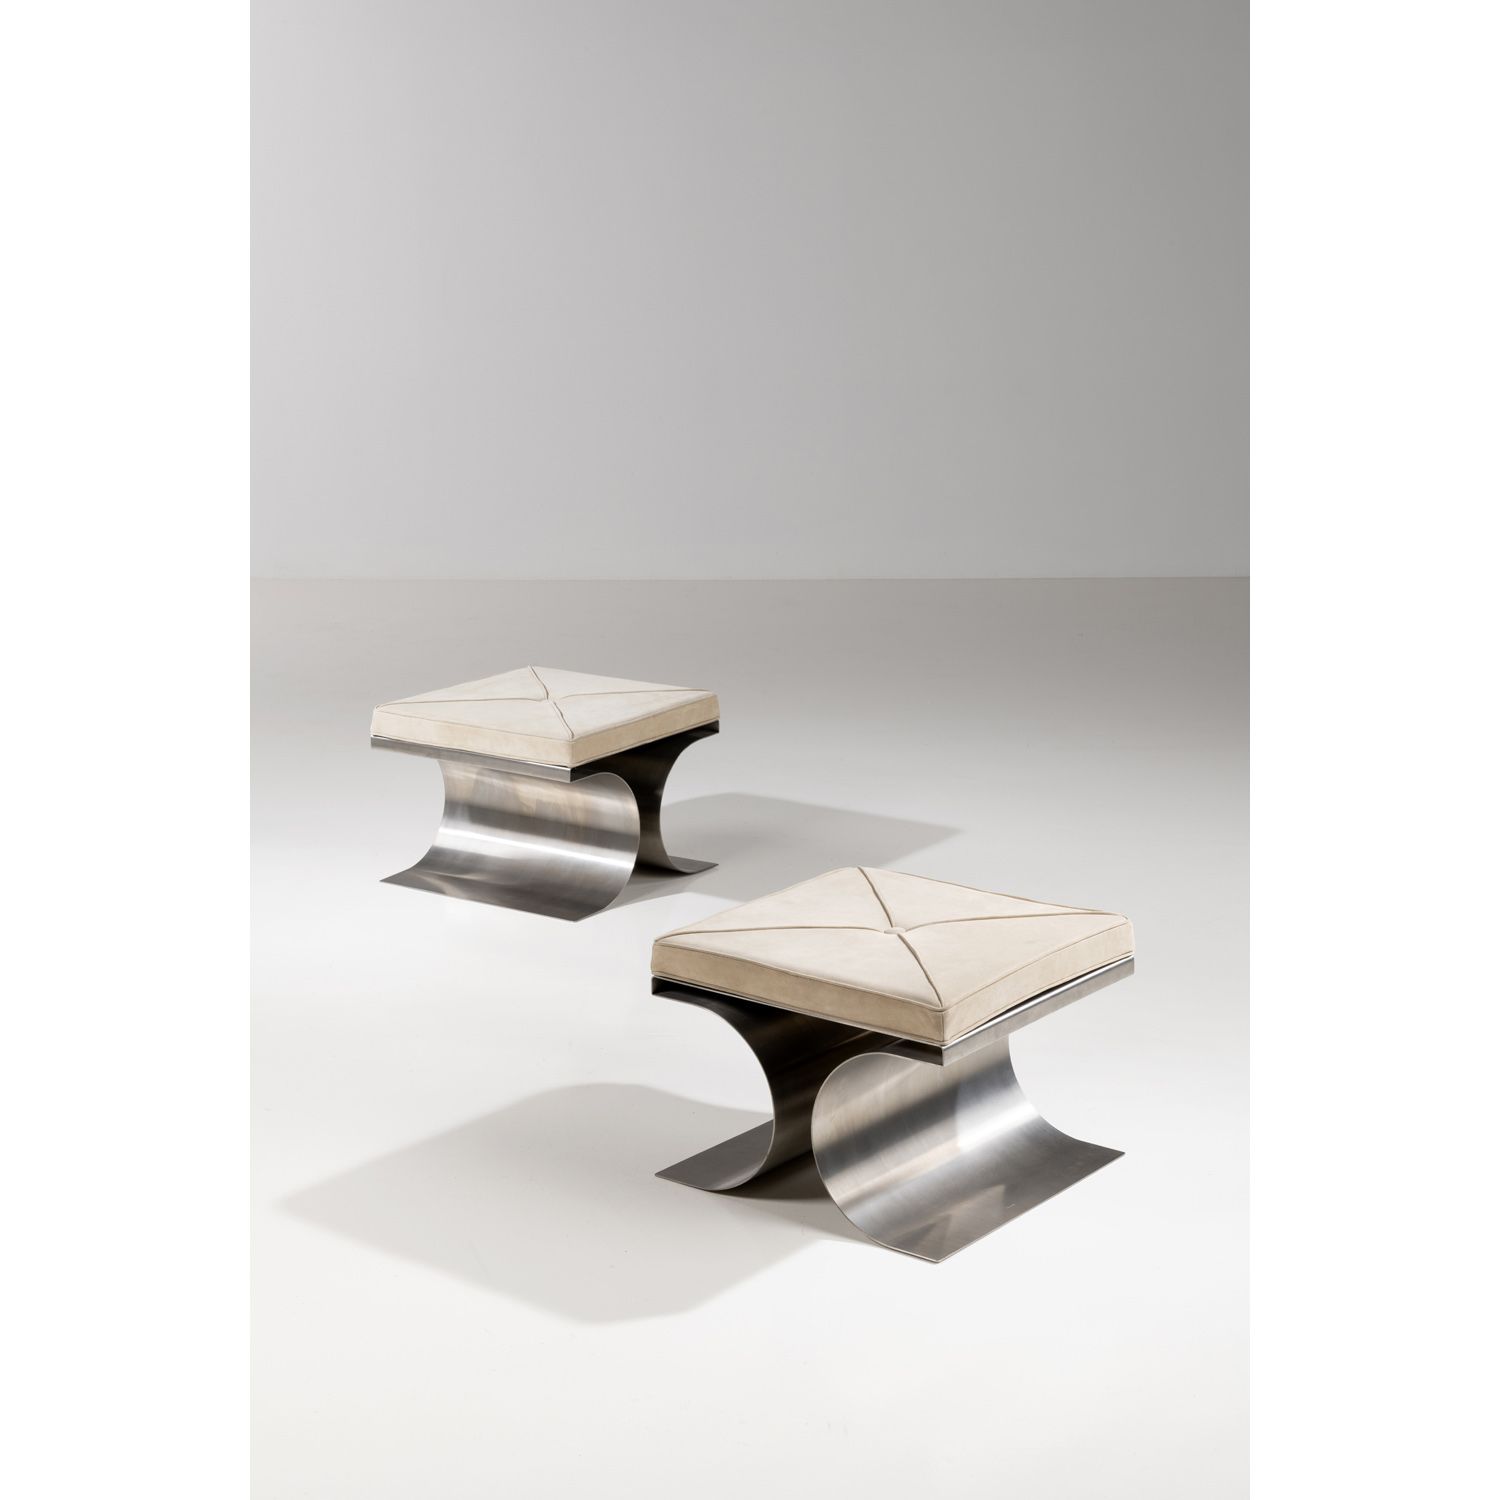 Null Michel Boyer (1935-2011)

X

Pair of stools

Stainless steel and shearling
&hellip;